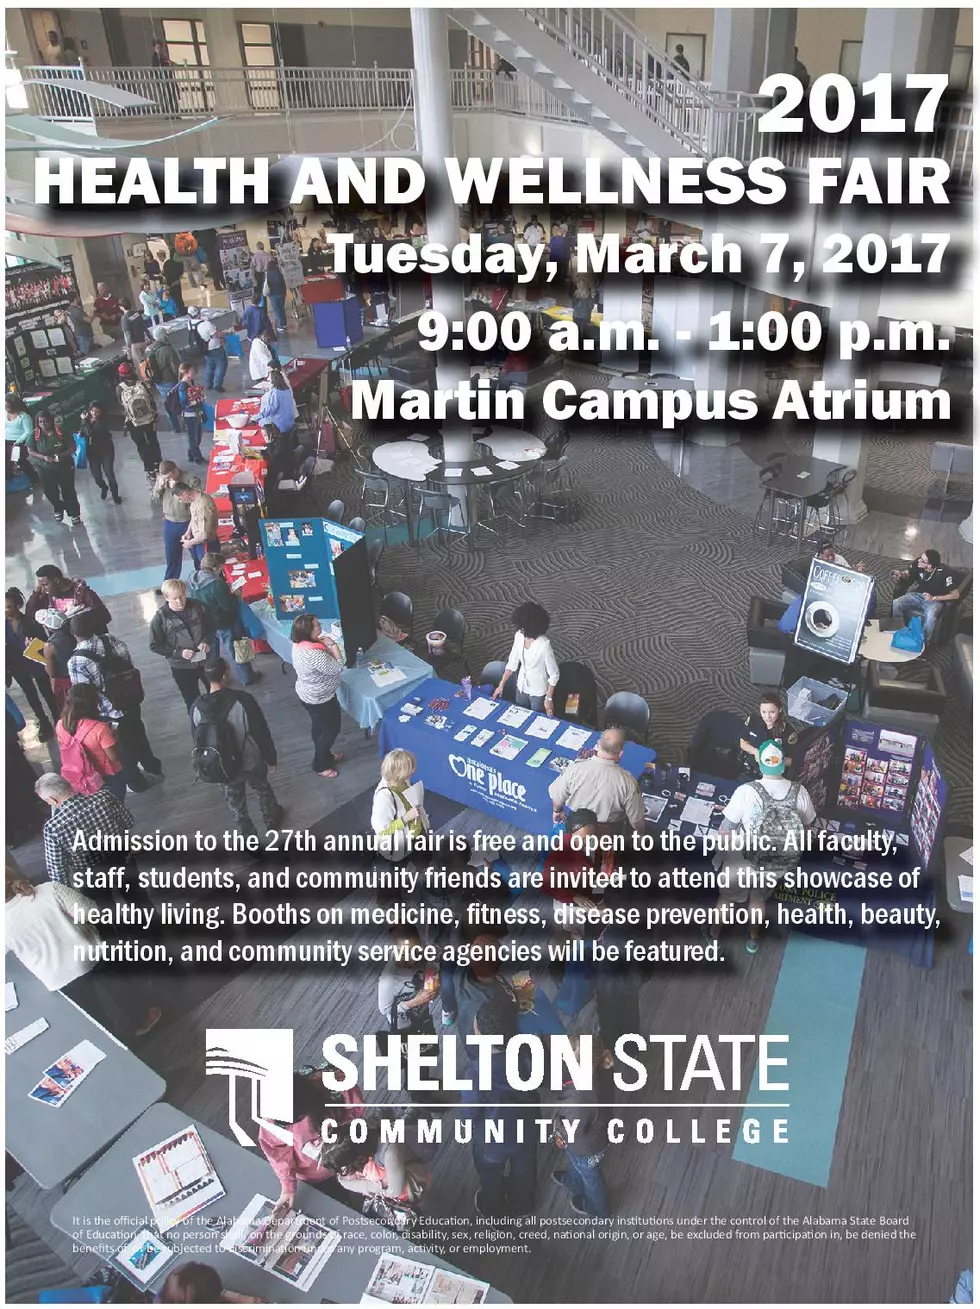 Shelton State to Host Health and Wellness Fair Tuesday, March 7th